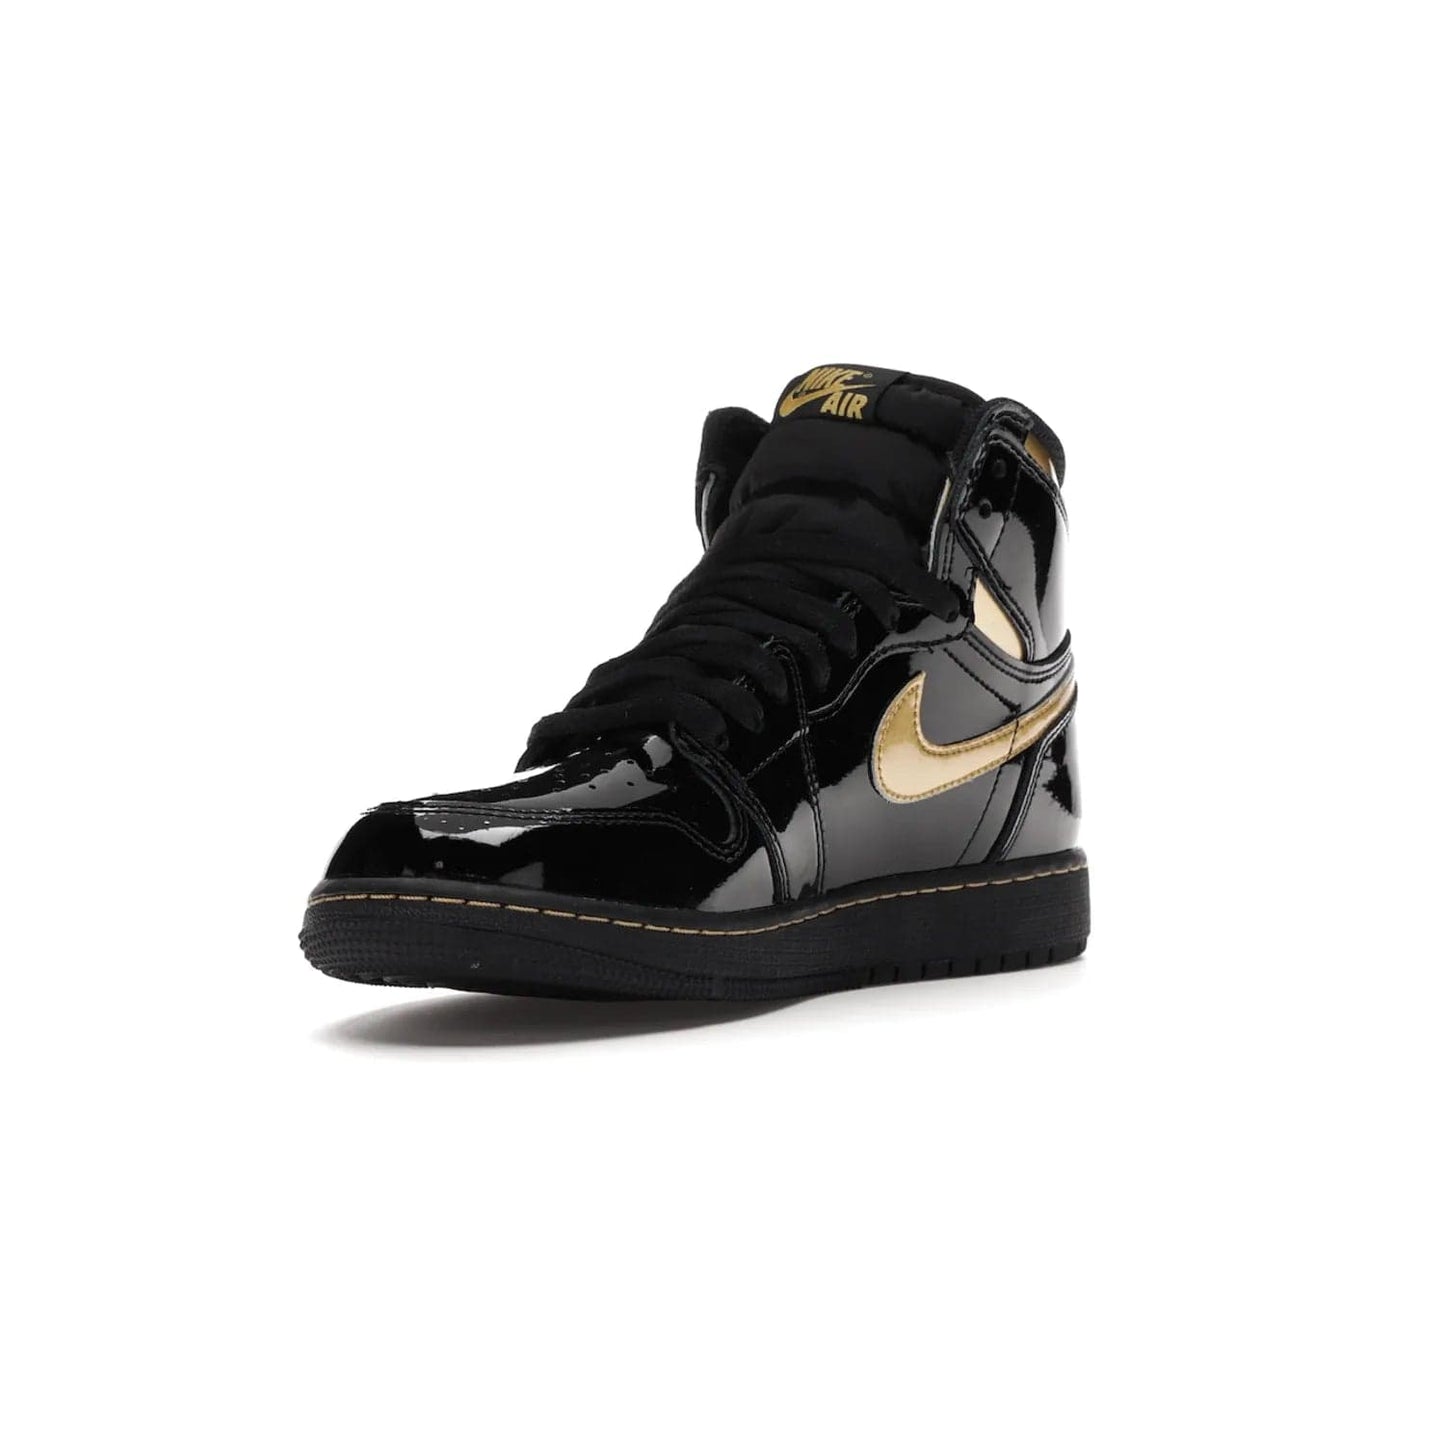 Jordan 1 Retro High Black Metallic Gold (2020) (GS) - Image 14 - Only at www.BallersClubKickz.com - Shop the Kids Air Jordan 1 Retro High in Black Metallic Gold for a stylish and comfortable sneaker kids can love. Featuring black and metallic gold patent leather uppers, metallic gold accents, and an Air sole unit for extra cushioning.